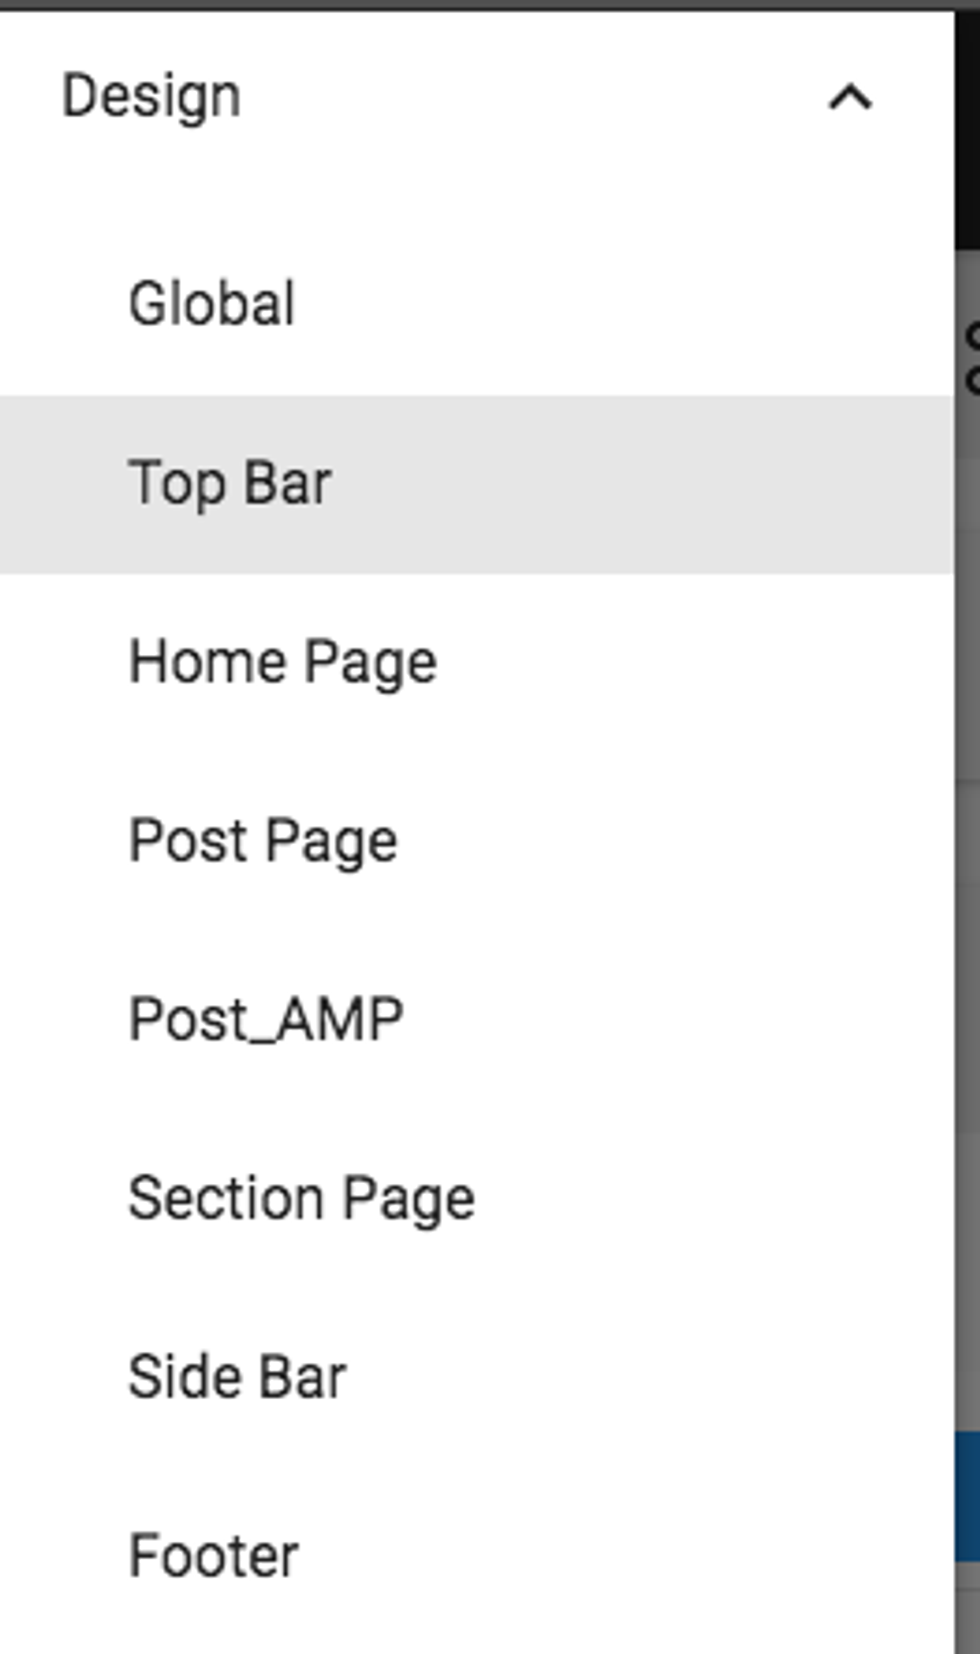 The Top Bar, Side Bar, and Footer